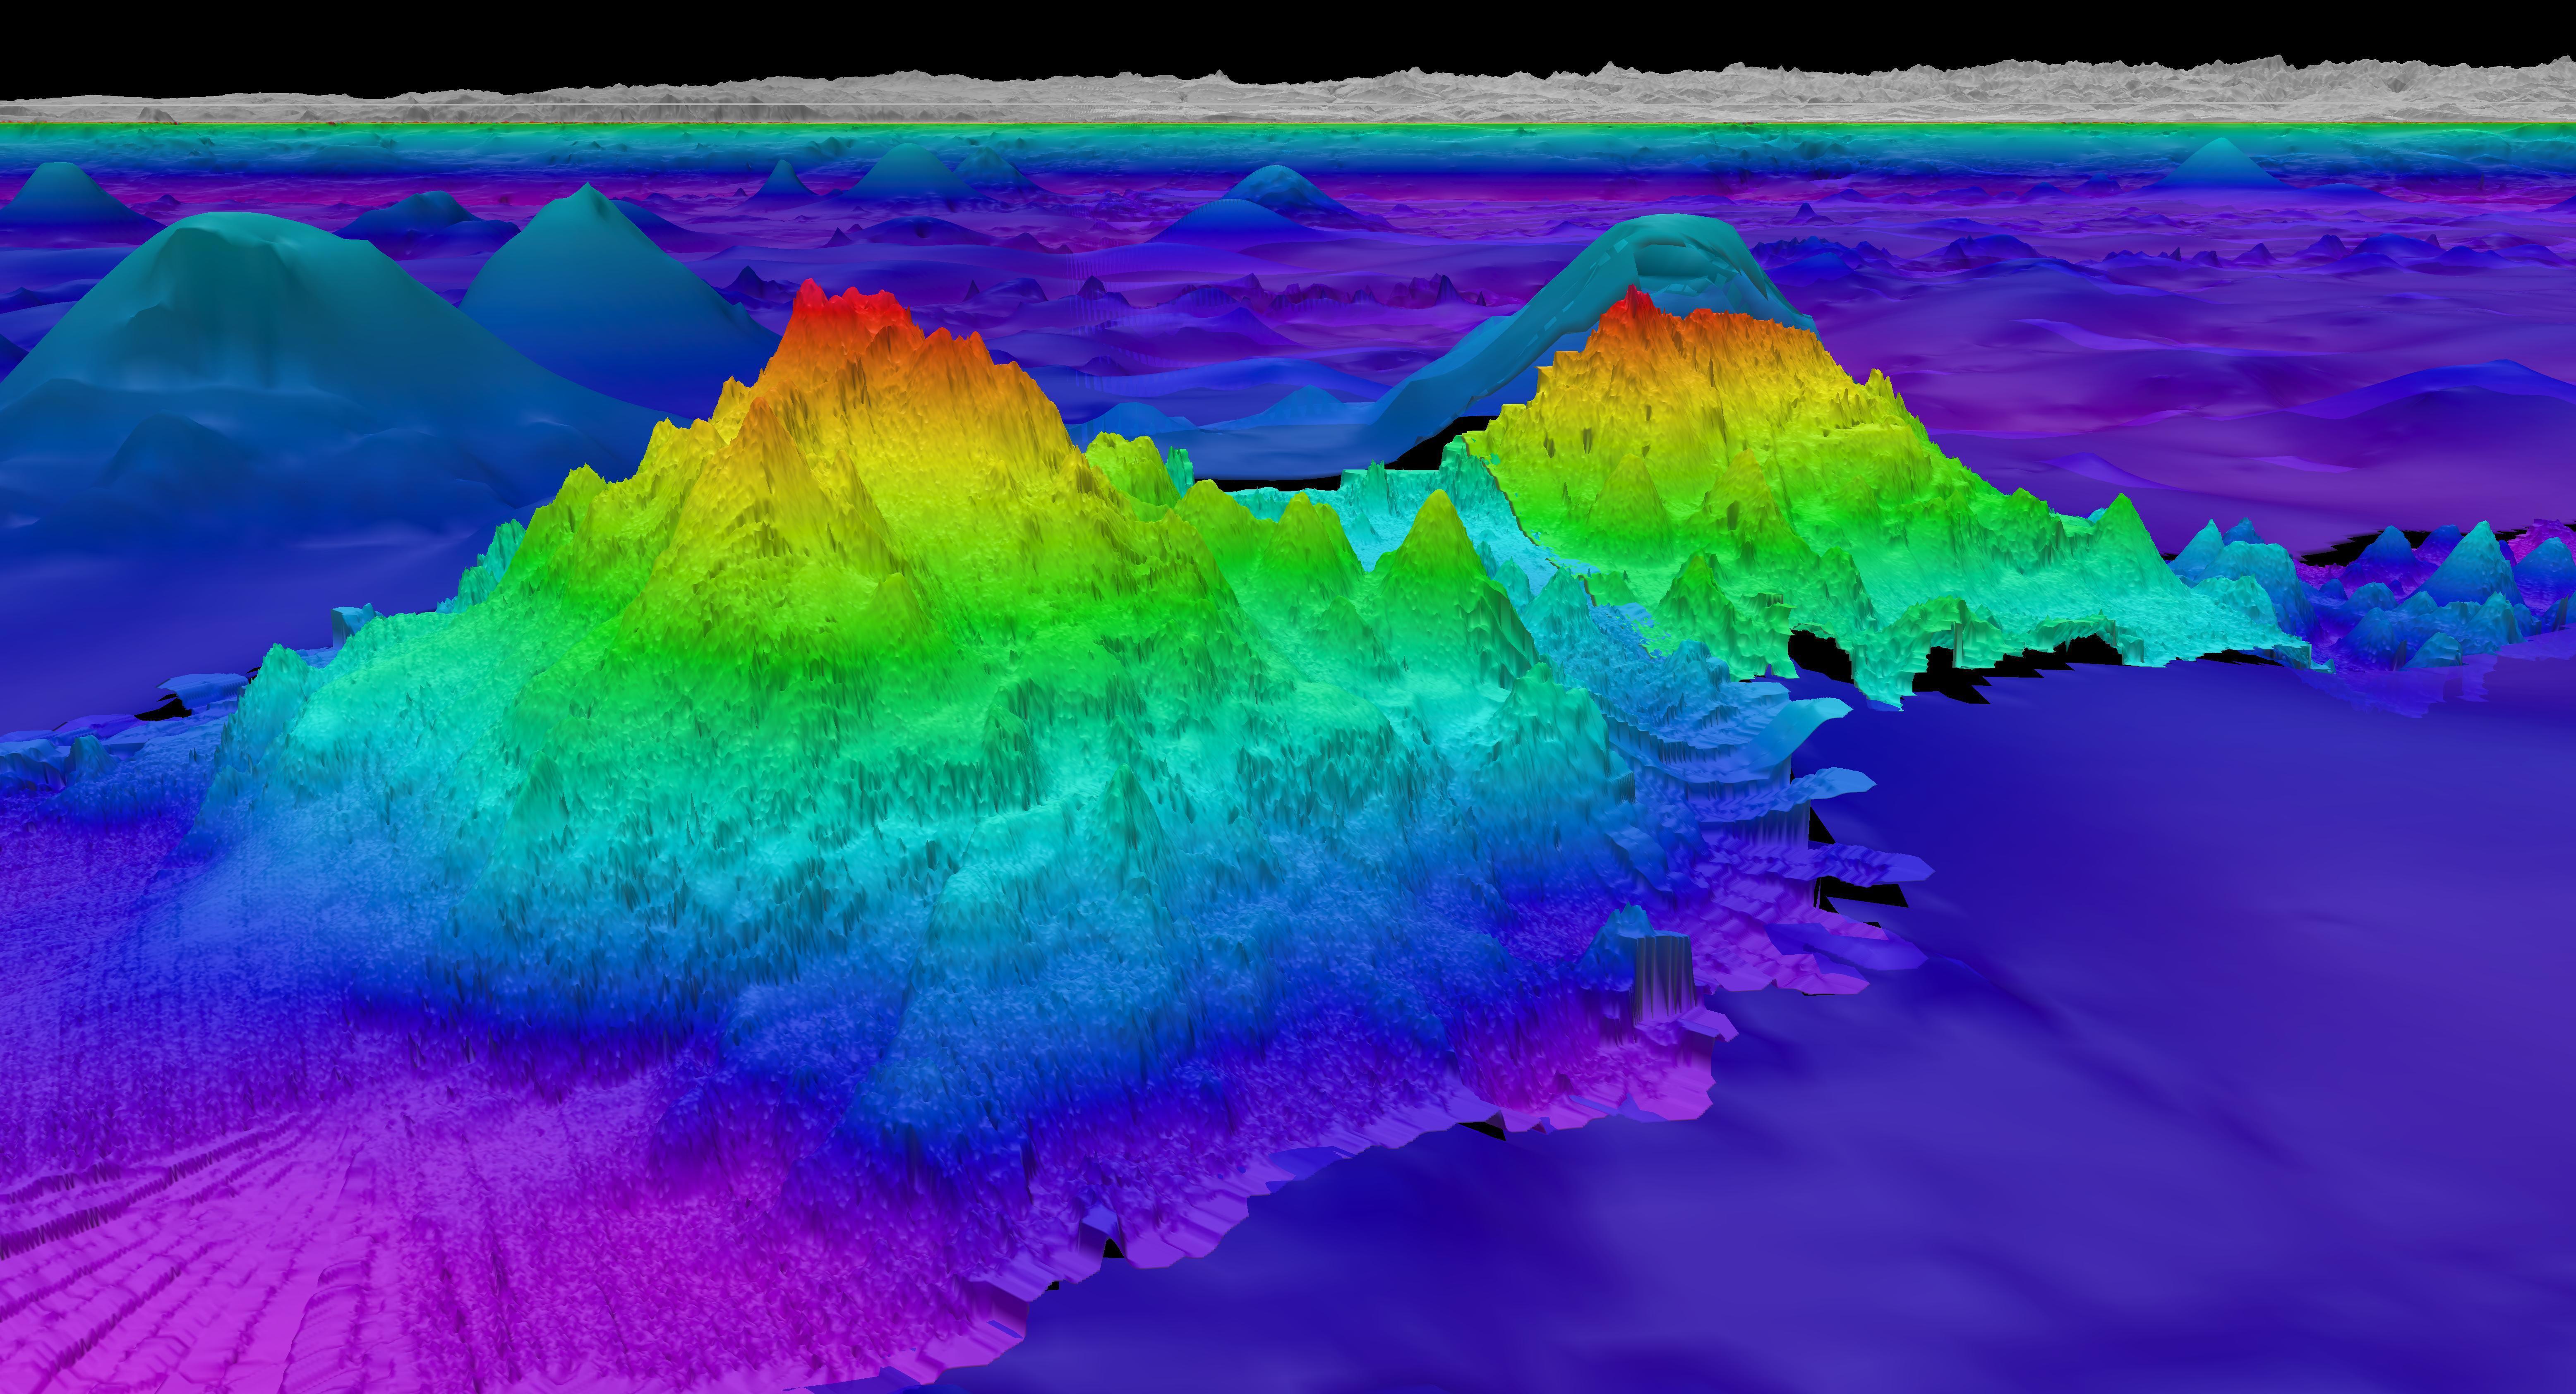 Underwater mountains three times taller than world’s largest structure discovered